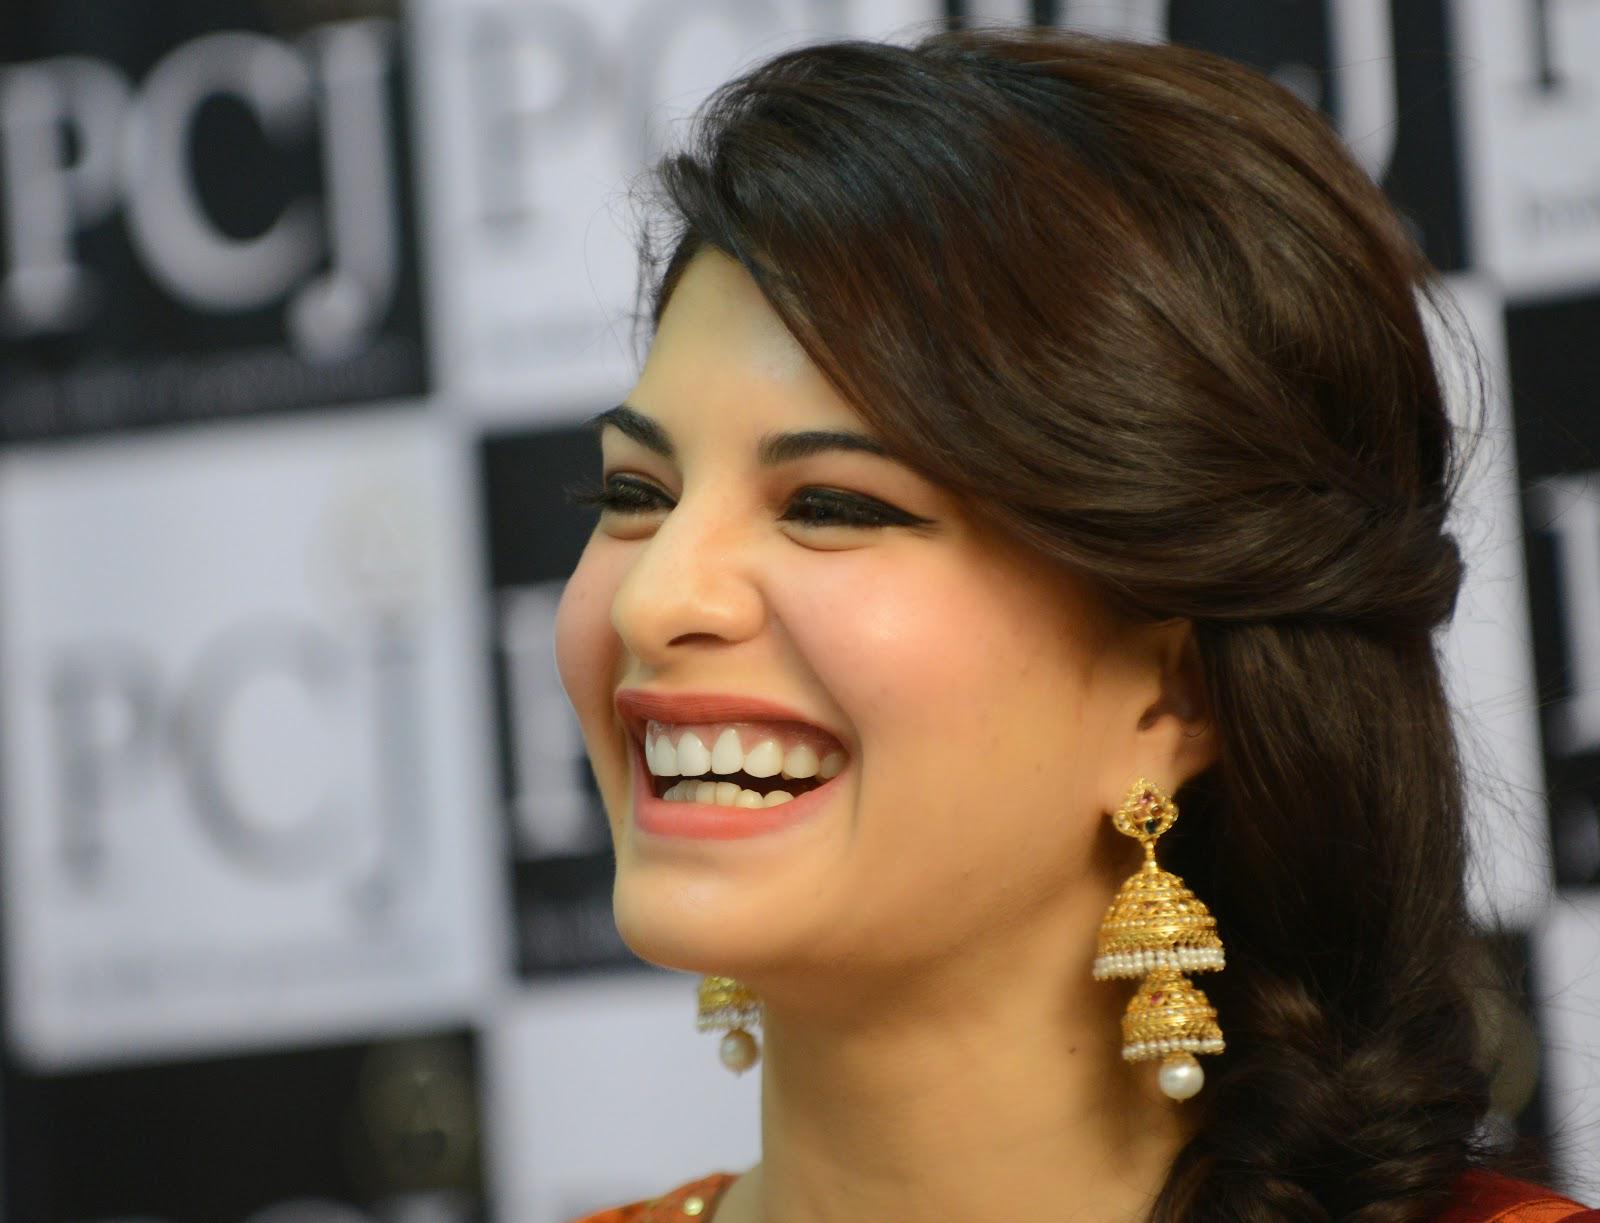 jacqueline fernandez wallpapers hd cute smile,hair,face,hairstyle,eyebrow,facial expression